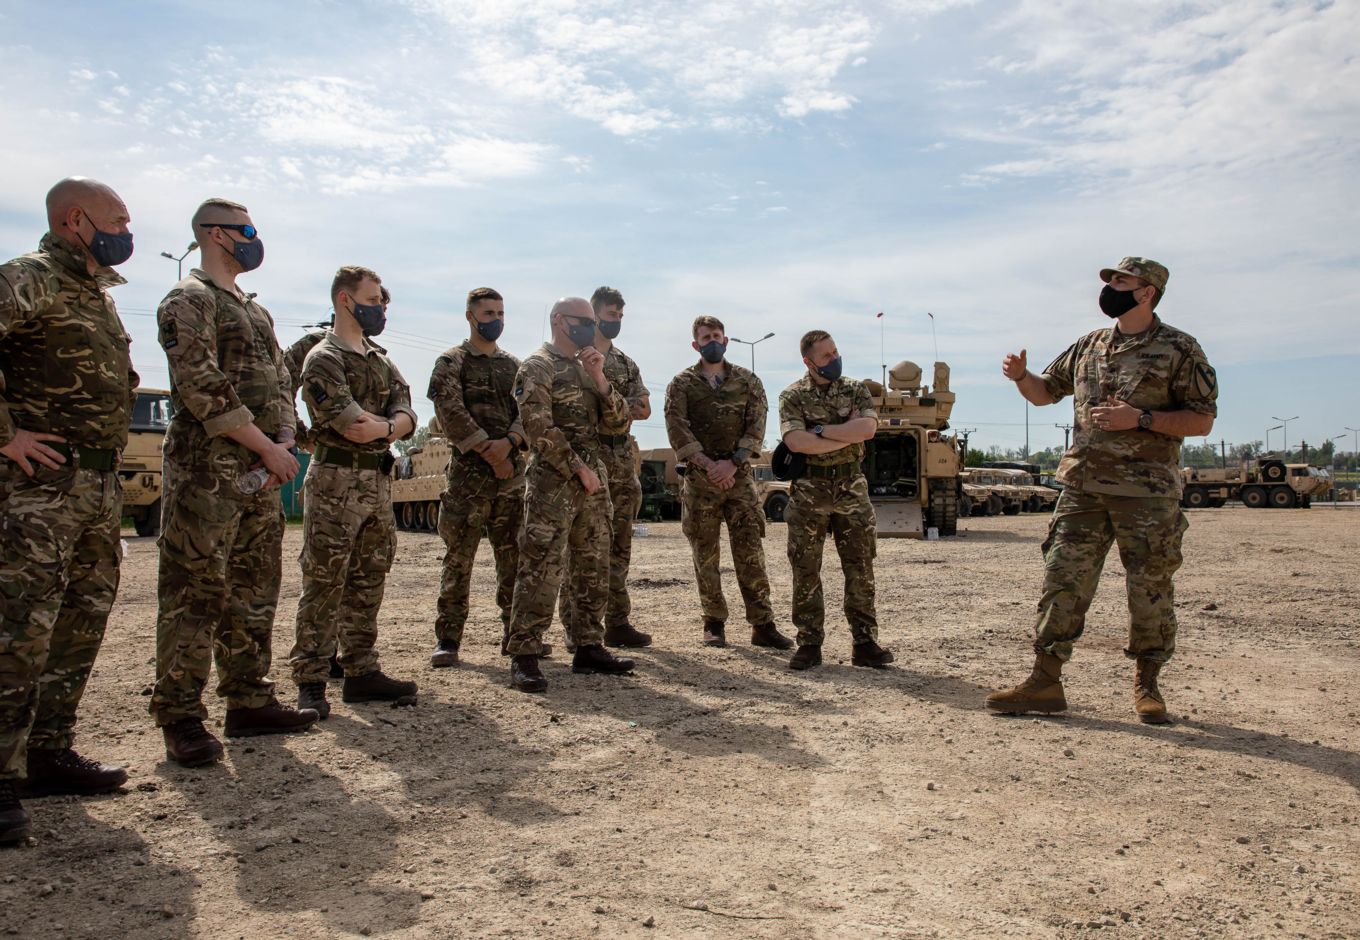 US Army and RAF Gunners stand in discussion.